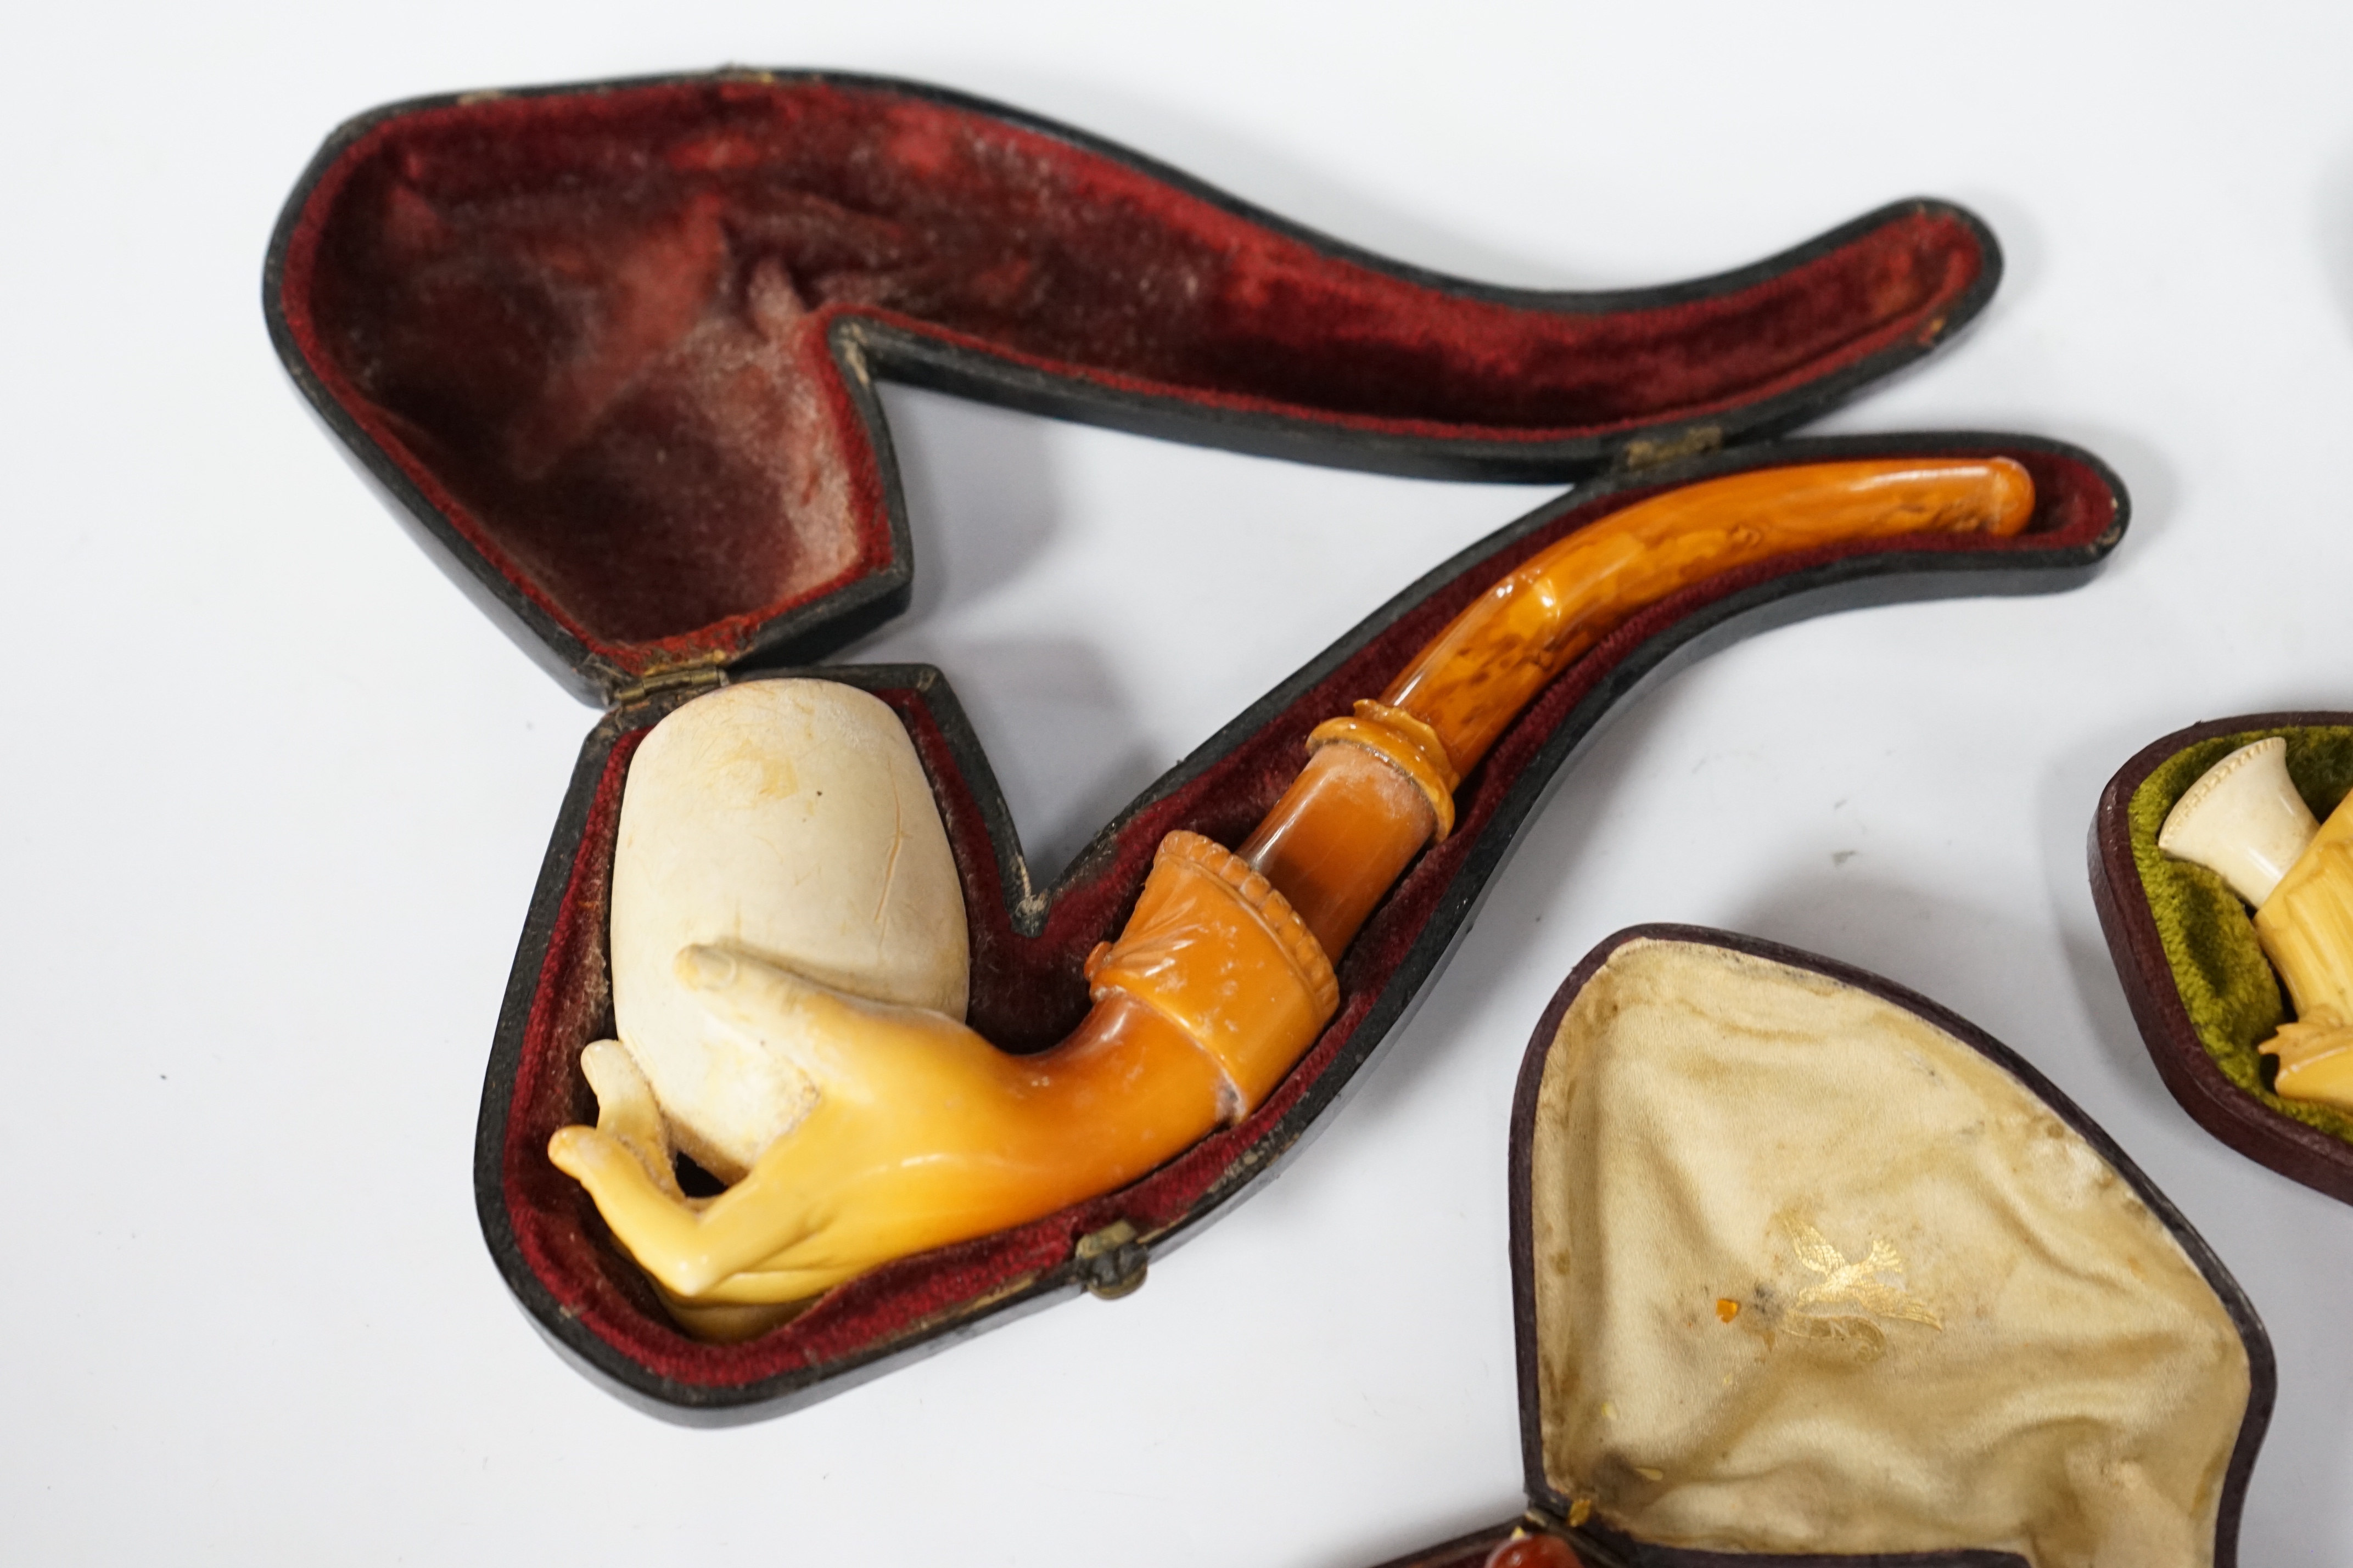 Three cased novelty Meerschaum pipes and pipe bowls, all with amber mouth pieces, one of a horses and cowboy, another a model of a hand and the other of a scantily clad lady wearing a riding cap, largest 17 cm long